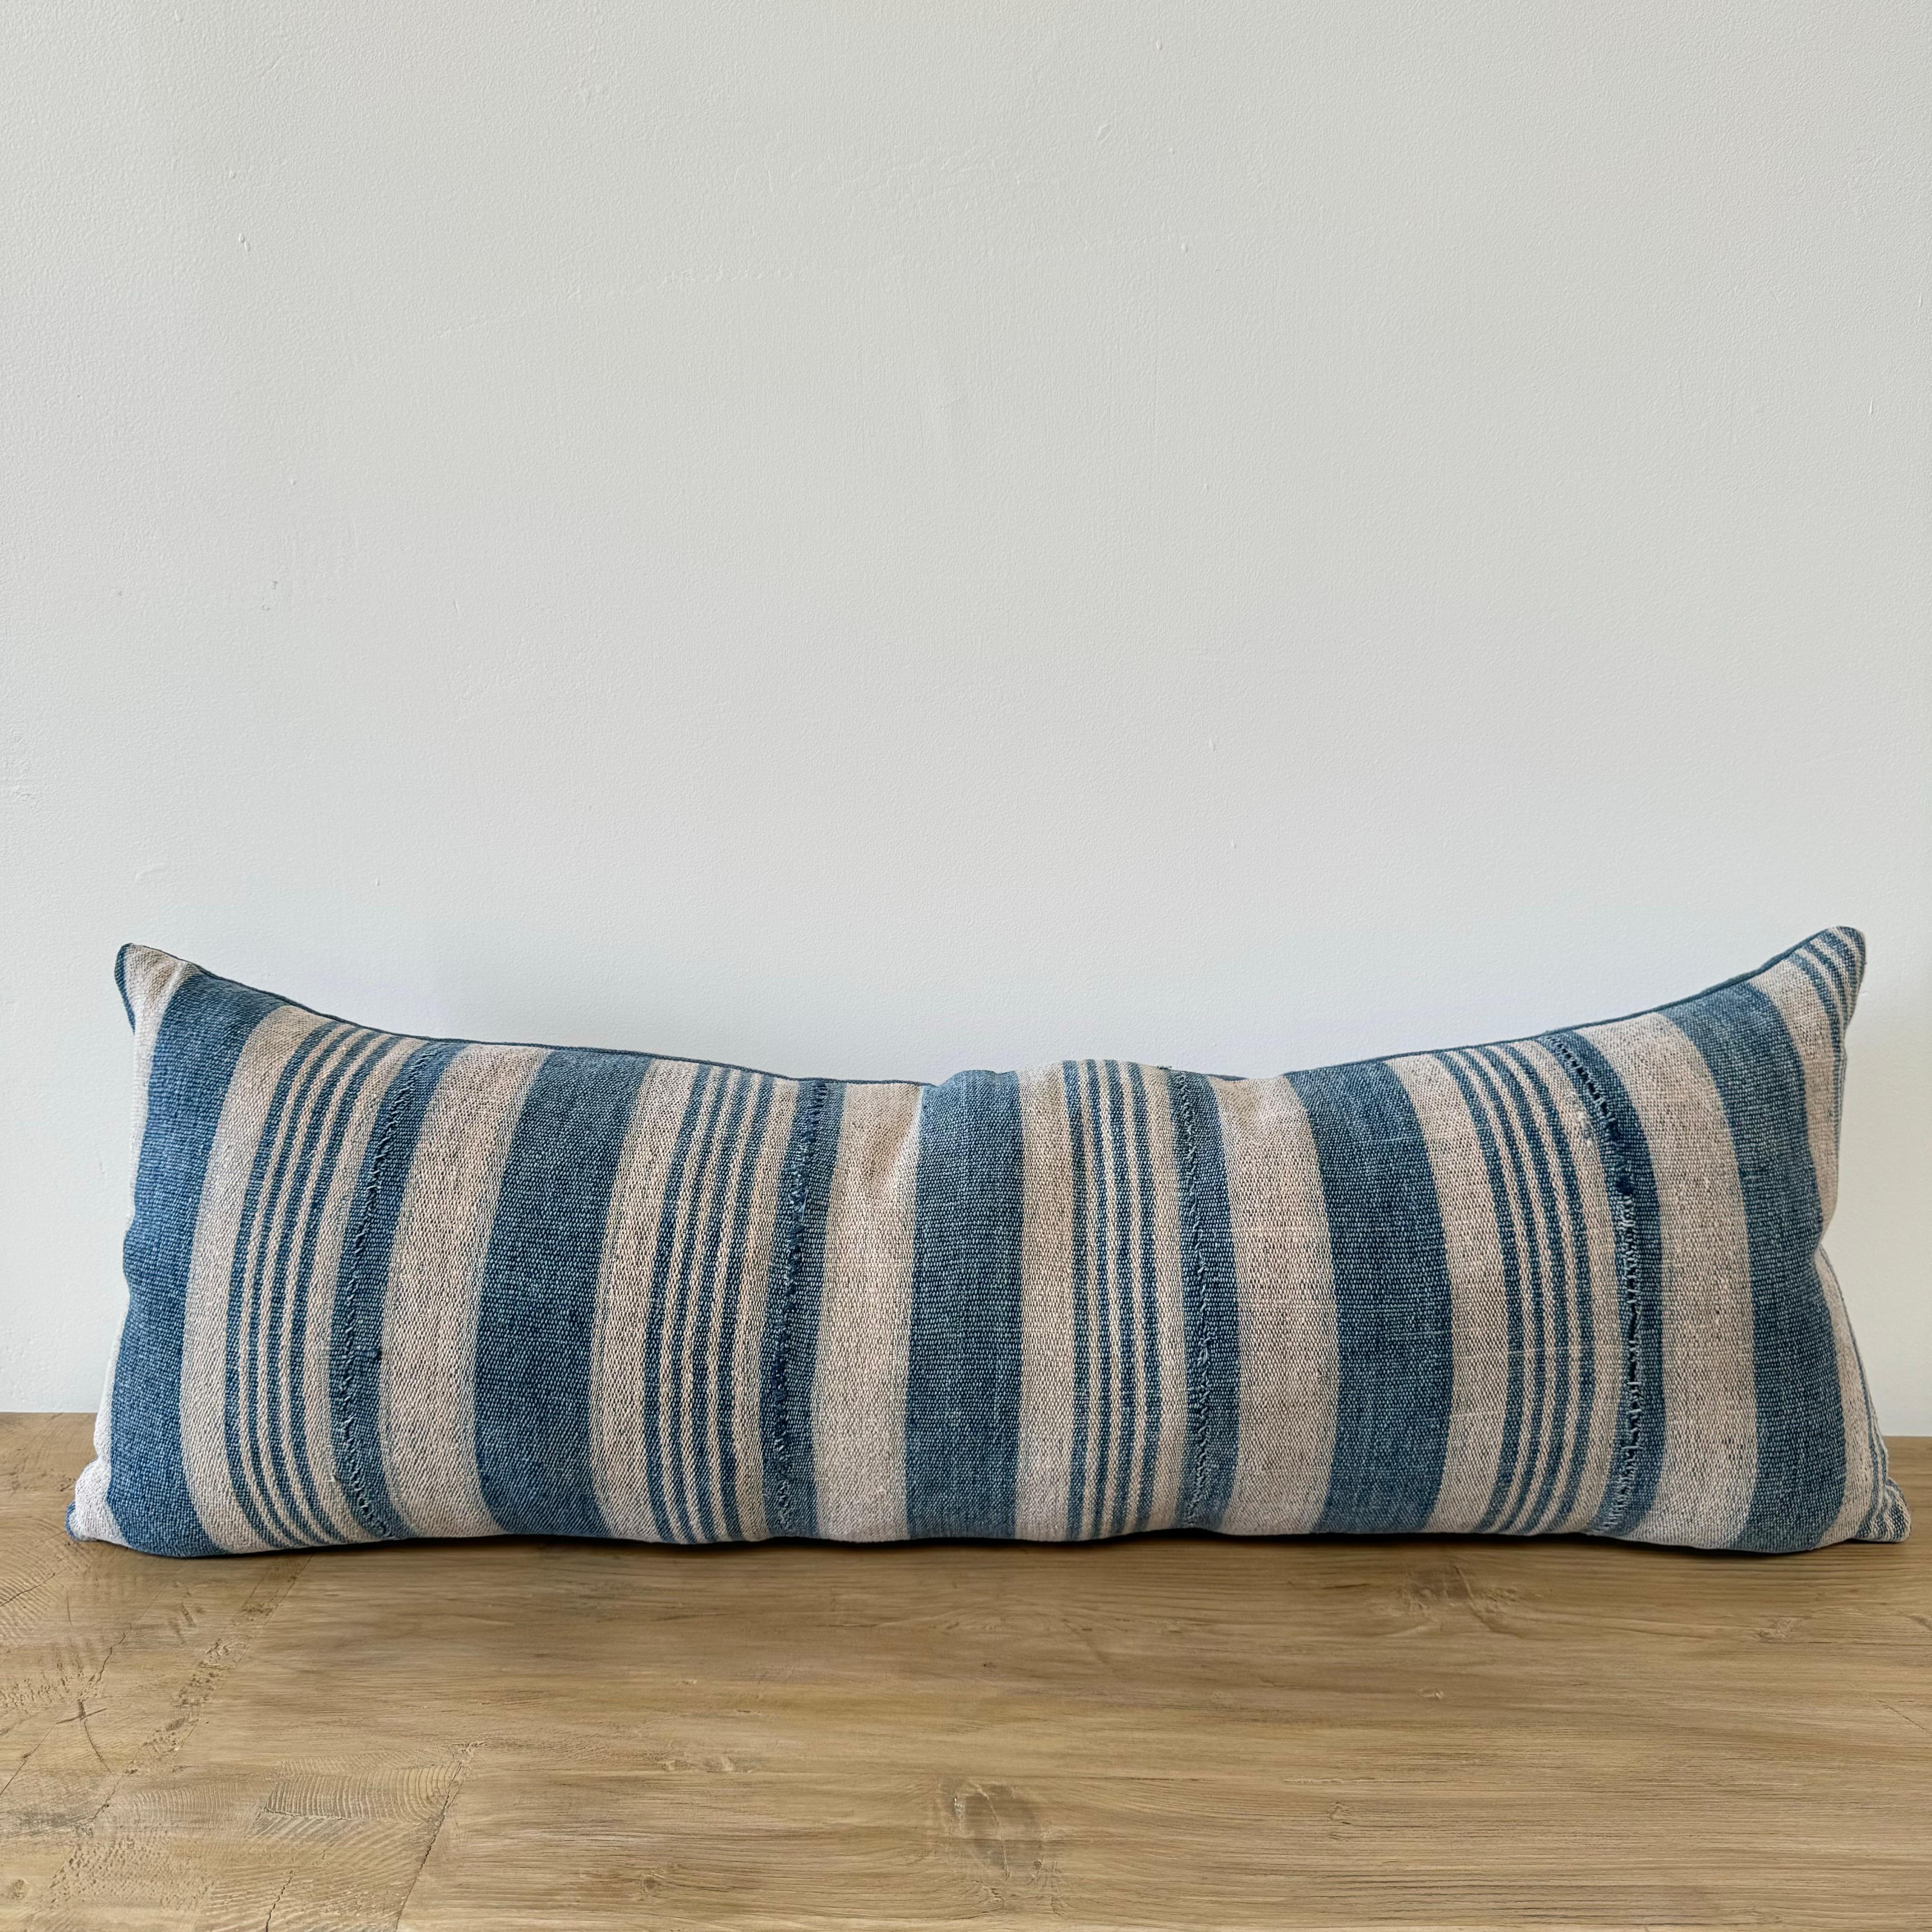 Vintage one of a kind blue batik stripe lumbar pillow
Face is a hemp linen stripe with stitched fabric panels, in a multi blue stripe.
The back is a solid coordinating blue linen
Size: 11